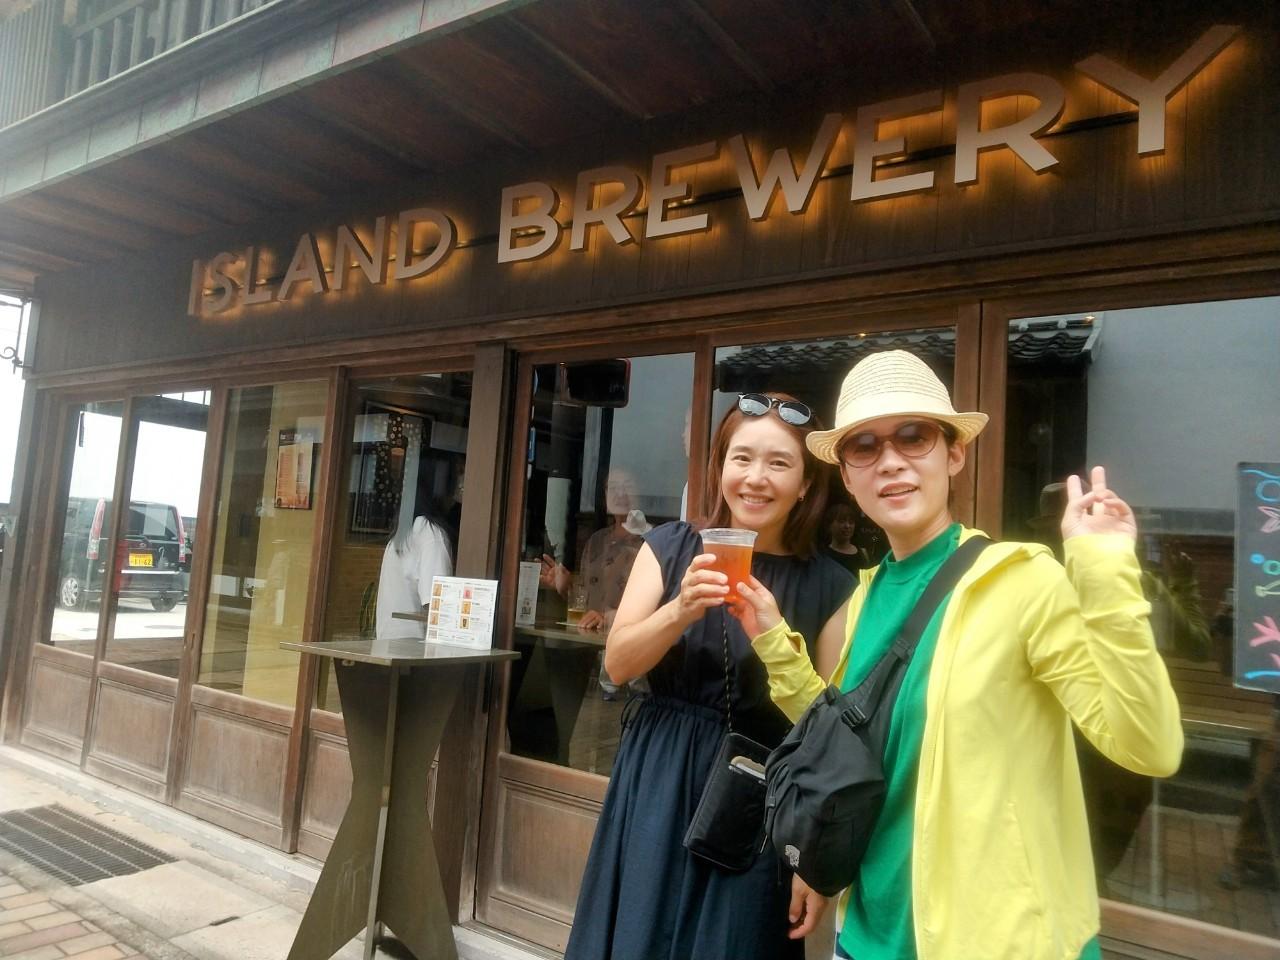 「ISLAND BREWERY」を目当てに島に来る人も！？人気のクラフトビール-1